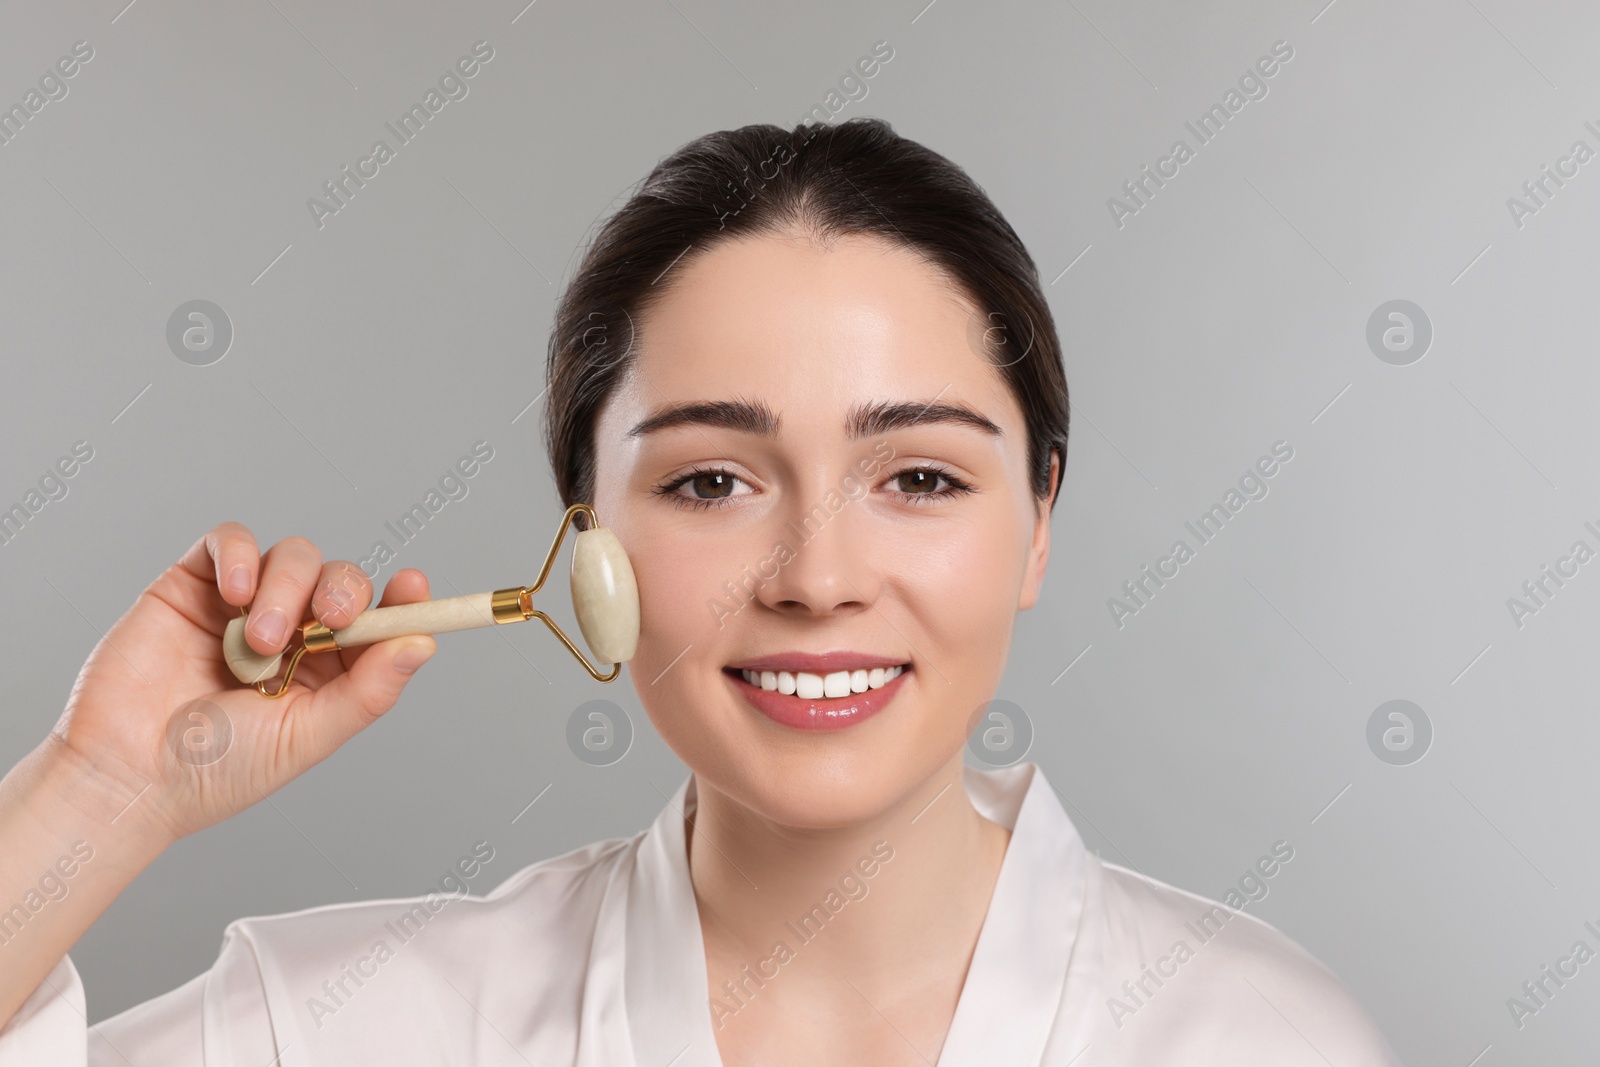 Photo of Young woman massaging her face with jade roller on grey background